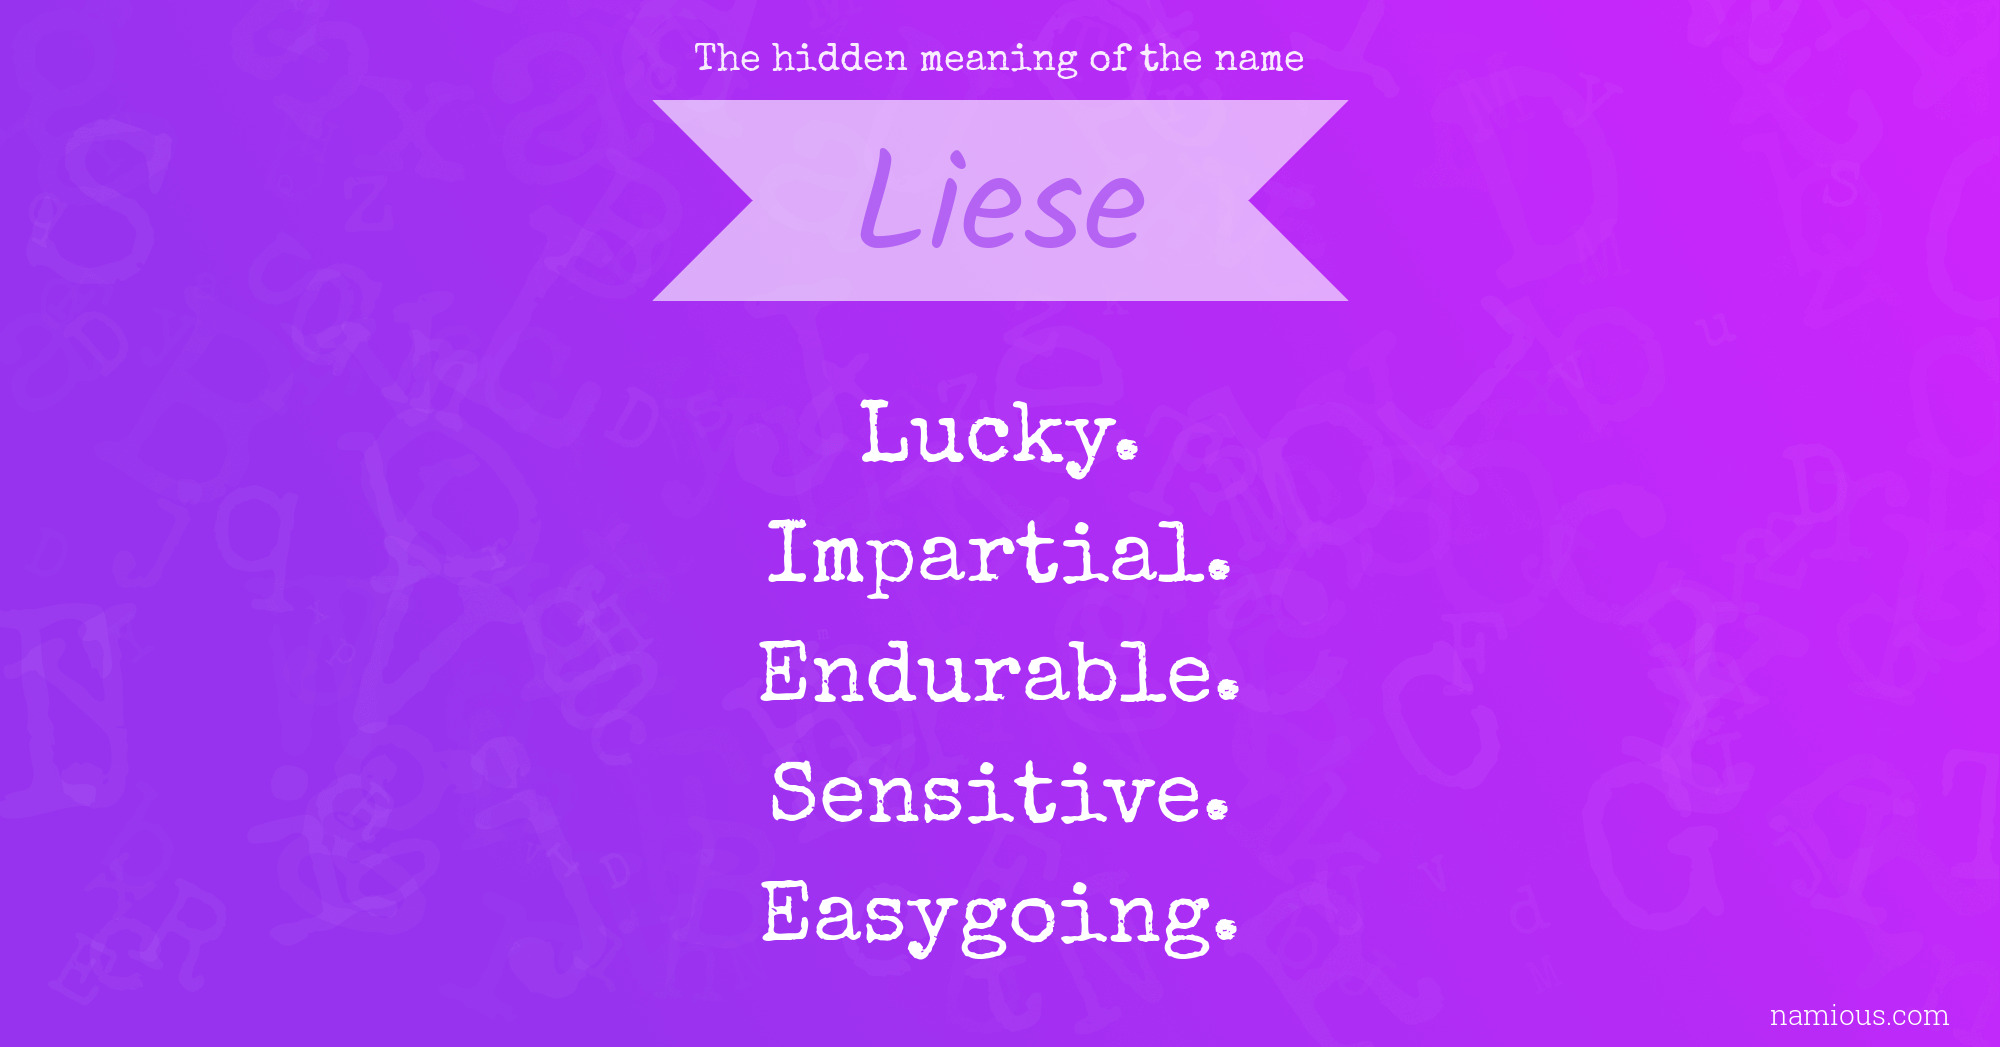 The hidden meaning of the name Liese